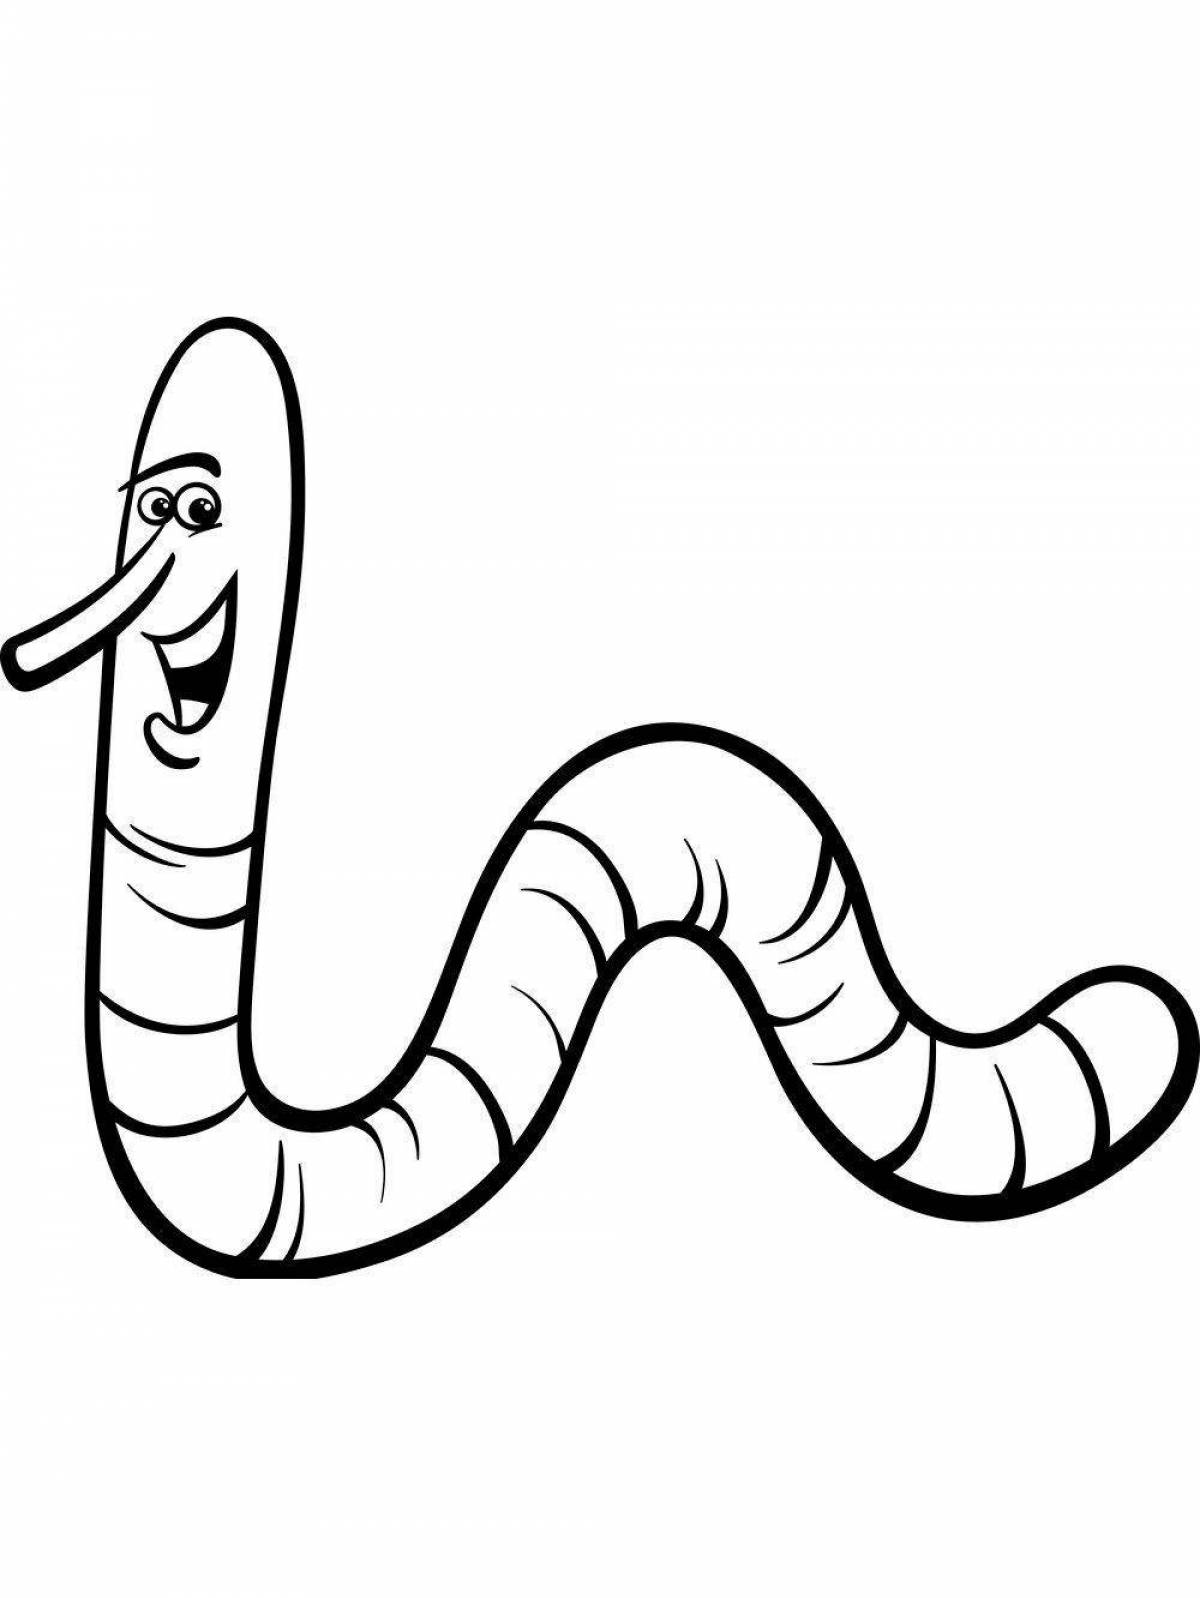 Worm for kids #8